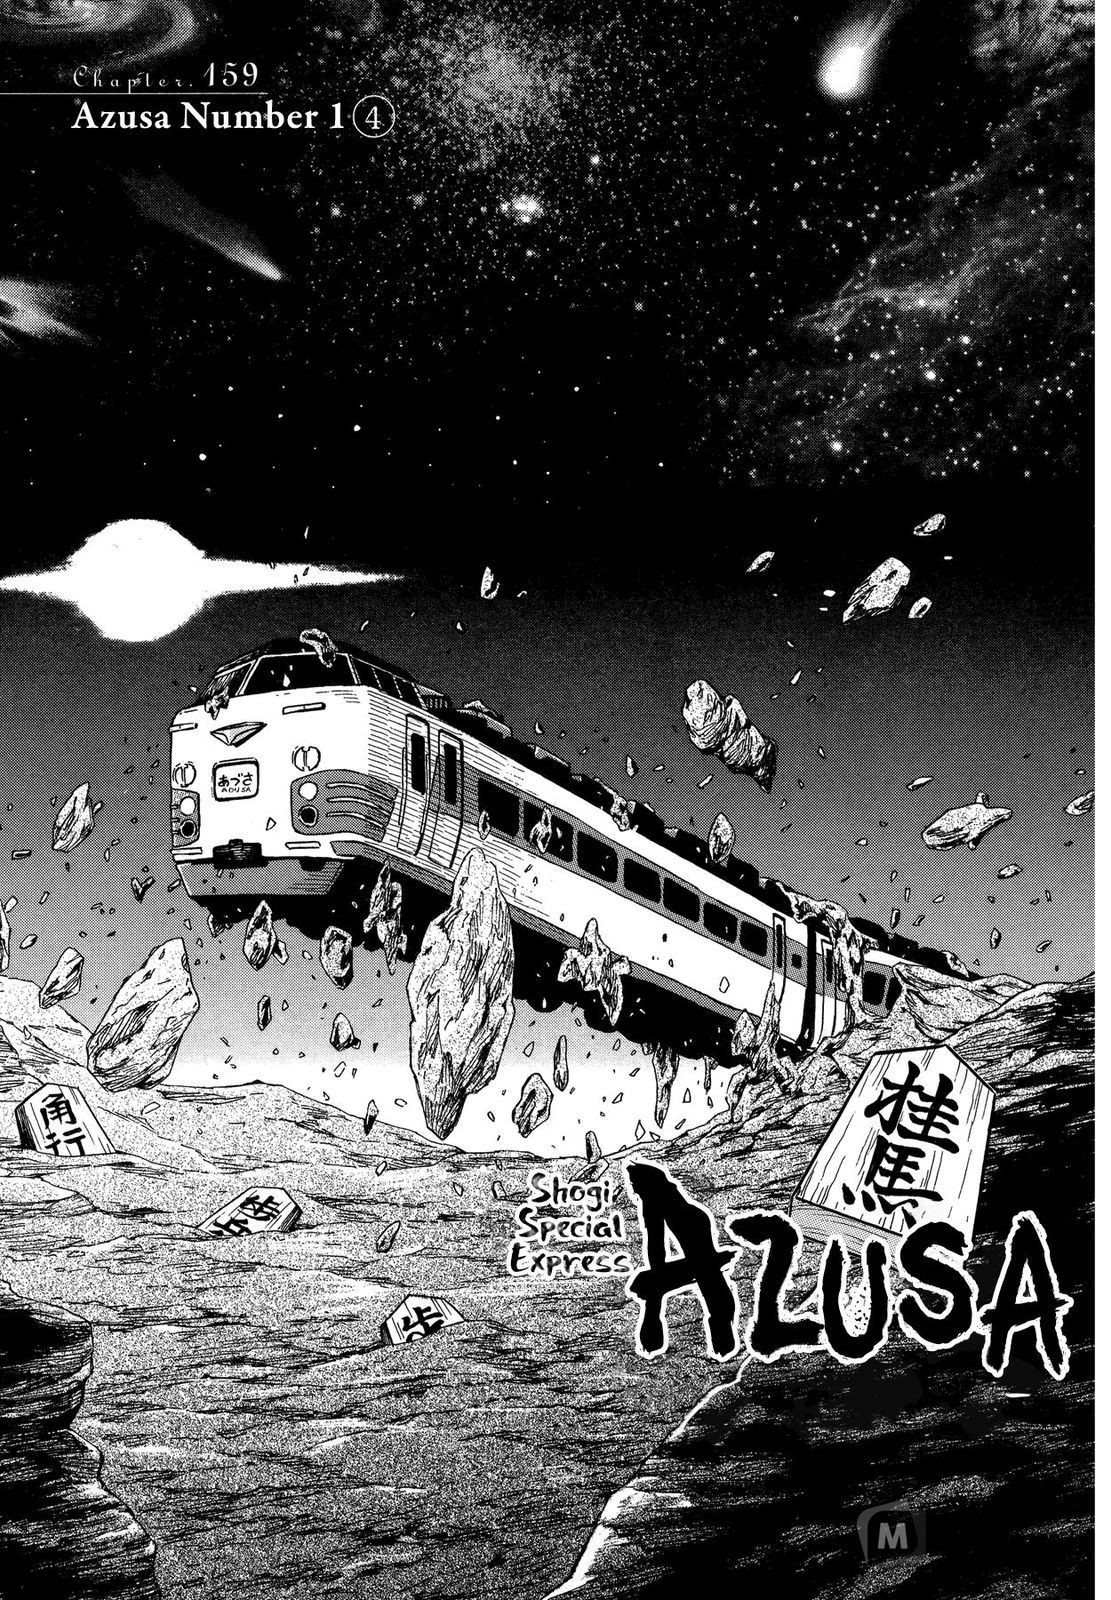 March Comes in Like a Lion, Chapter 159 Azusa Number 1 (Part 4) (EN) image 01